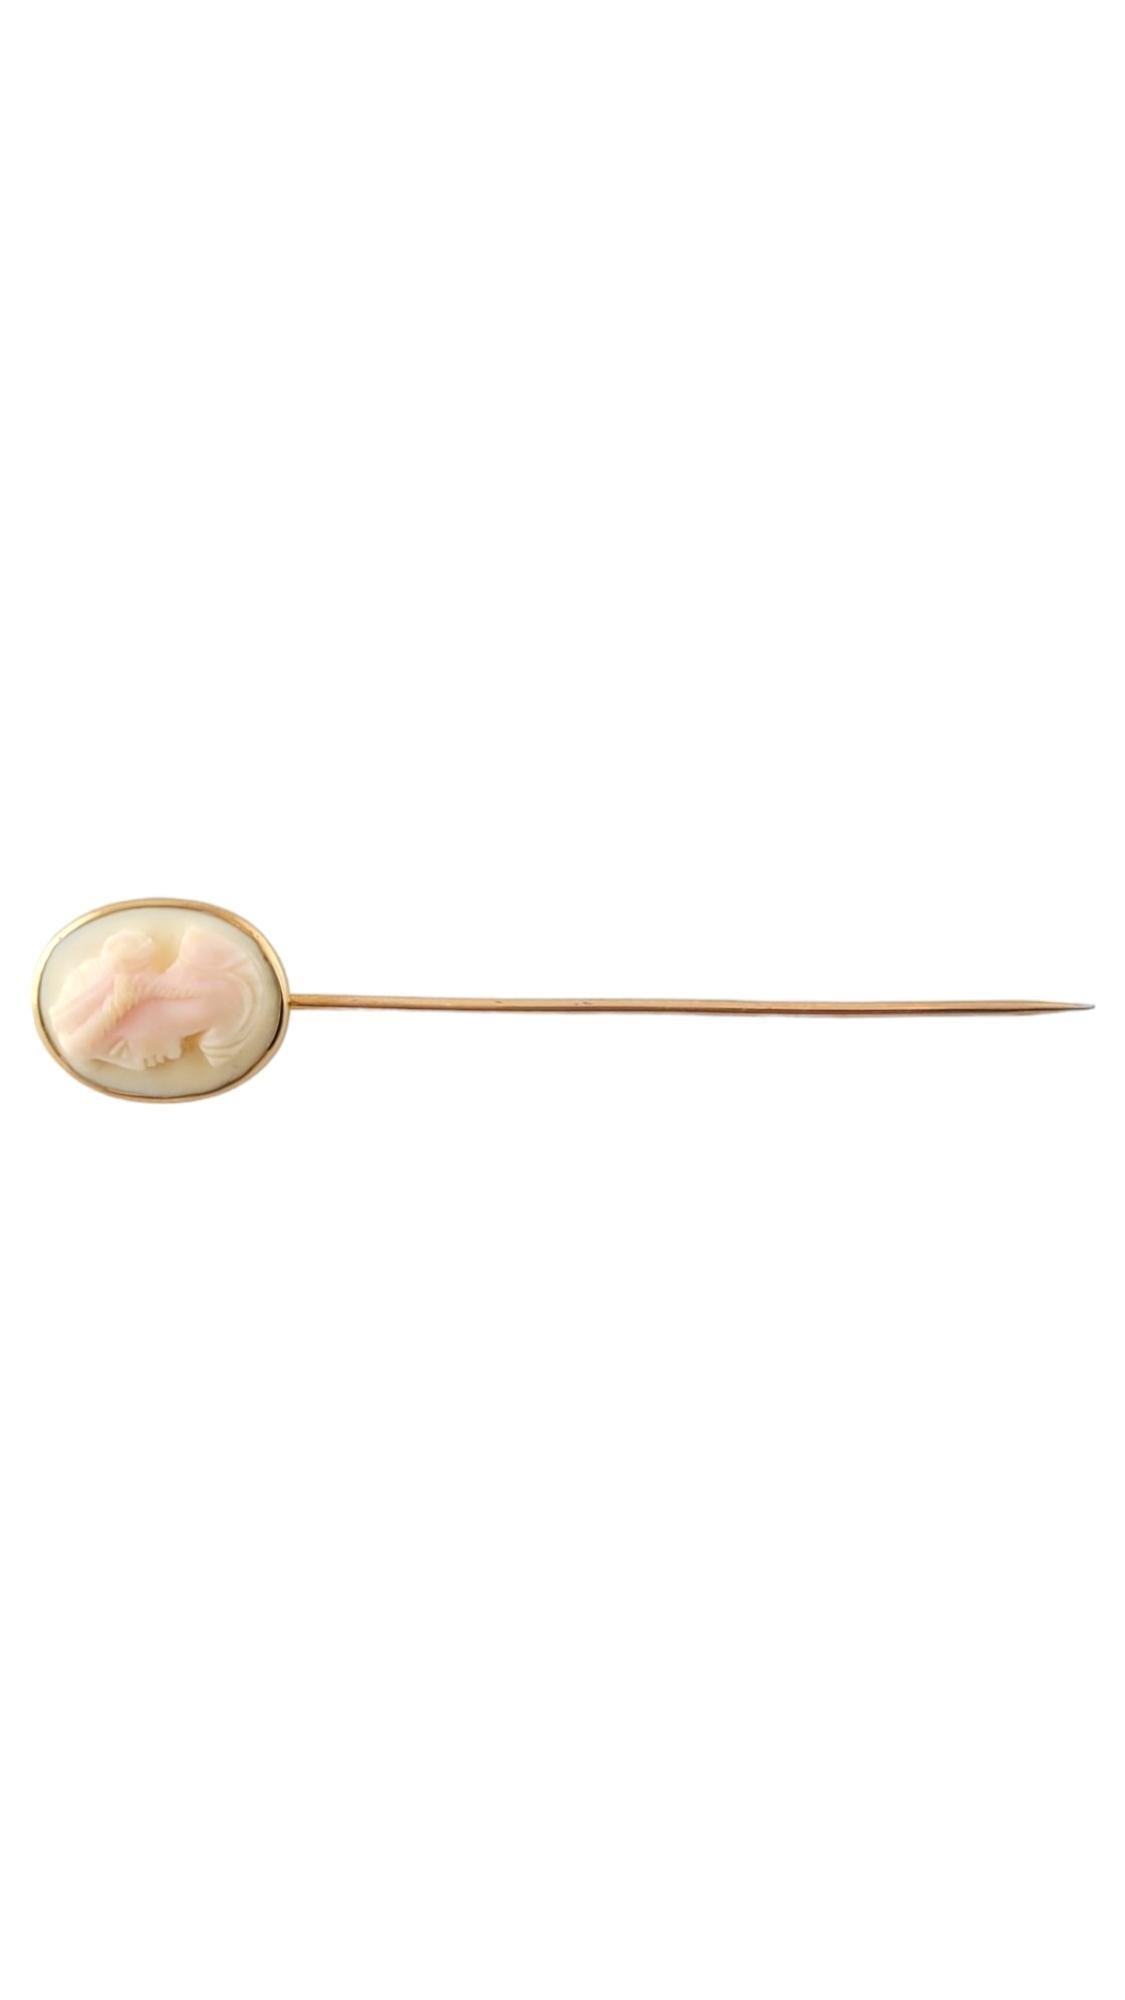 Vintage 10K Yellow Gold Cameo Stick Pin

This beautiful cameo stick pin is crafted from 10K yellow gold and would look gorgeous on anyone!

Pin length: 66.83mm
Cameo size: 16.25mm X 12.92mm X 7.27mm

Weight: 1.2 dwt/ 1.9 g

Tested 10K

Very good